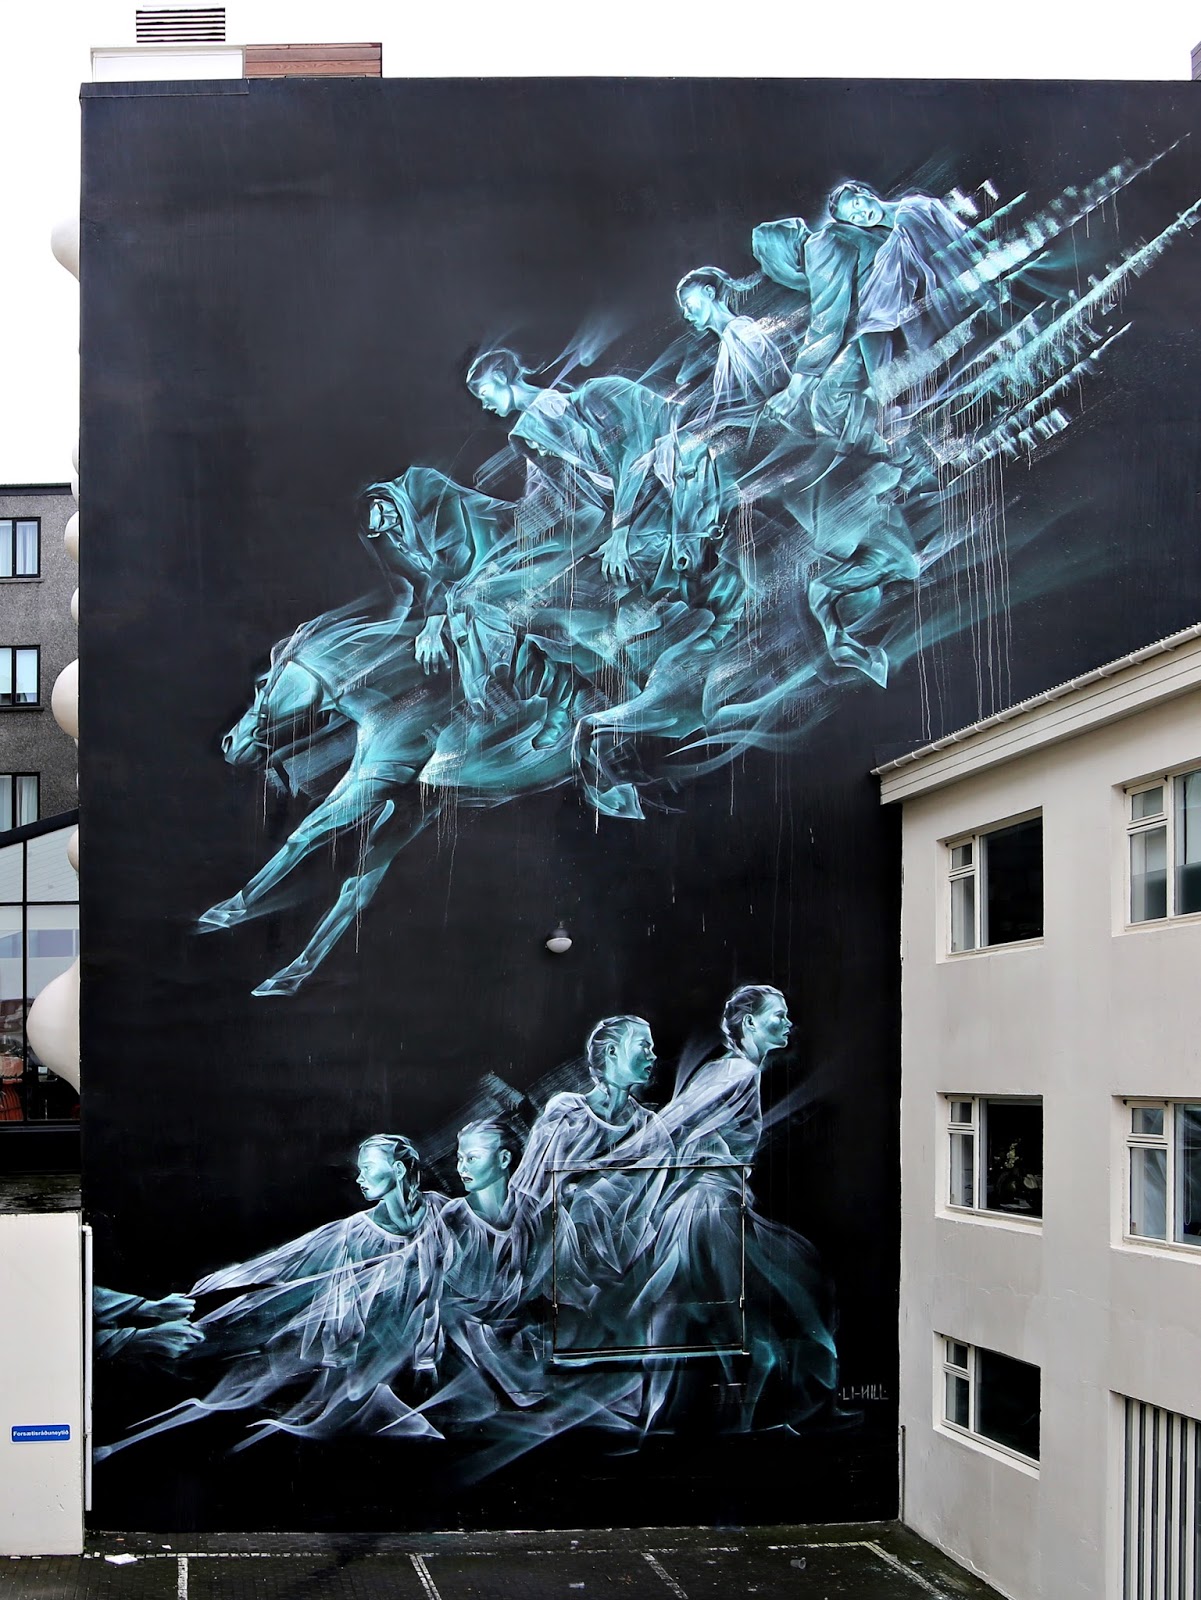 "The Deacon of Dark River", a new mural by Li-Hill in ...